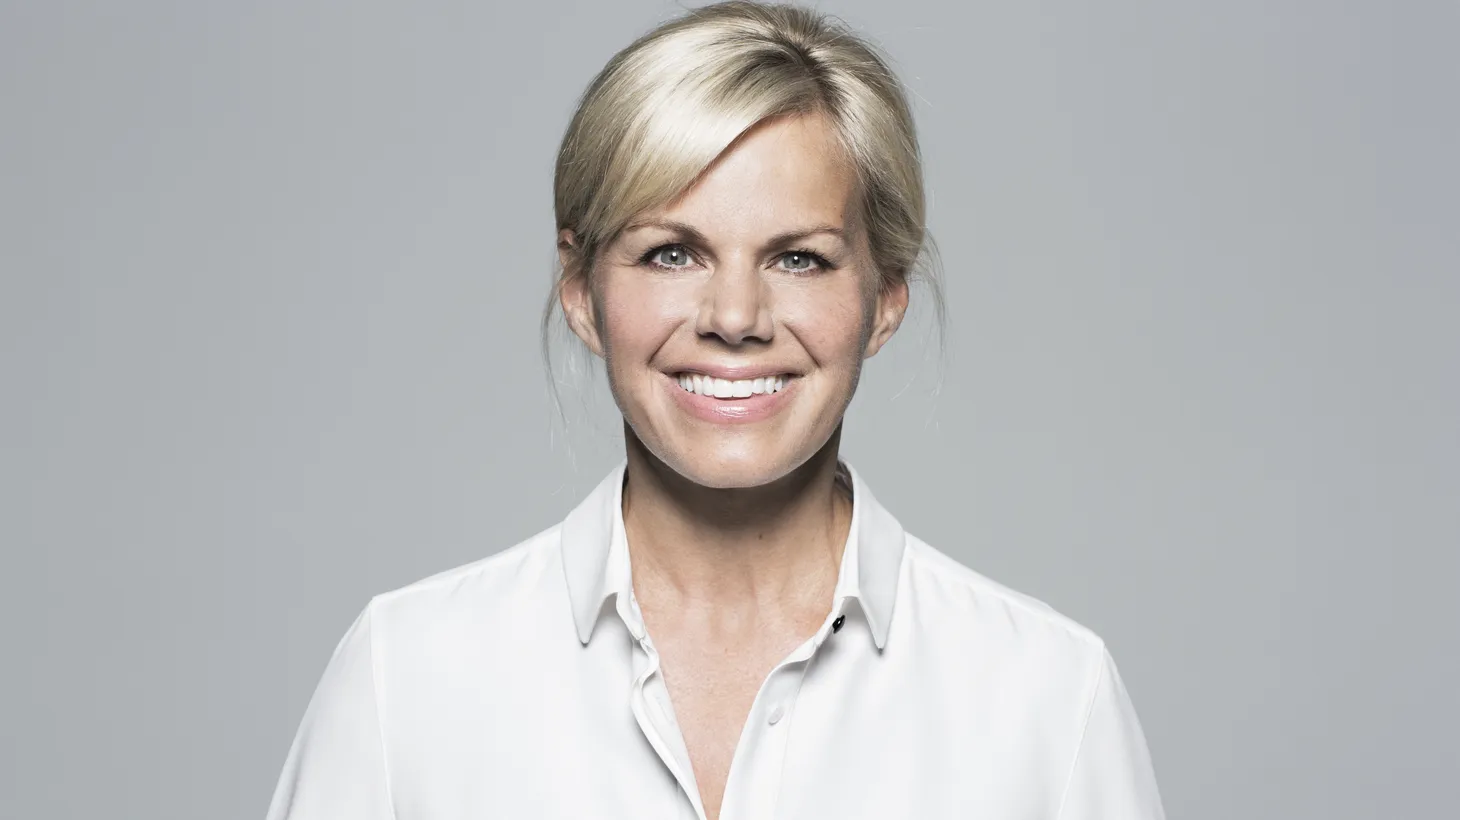 Legislation passed by Congress last week could drastically change how companies deal with sexual misconduct in the workplace. Former Fox News host Gretchen Carlson has been one of the bill's biggest advocates.